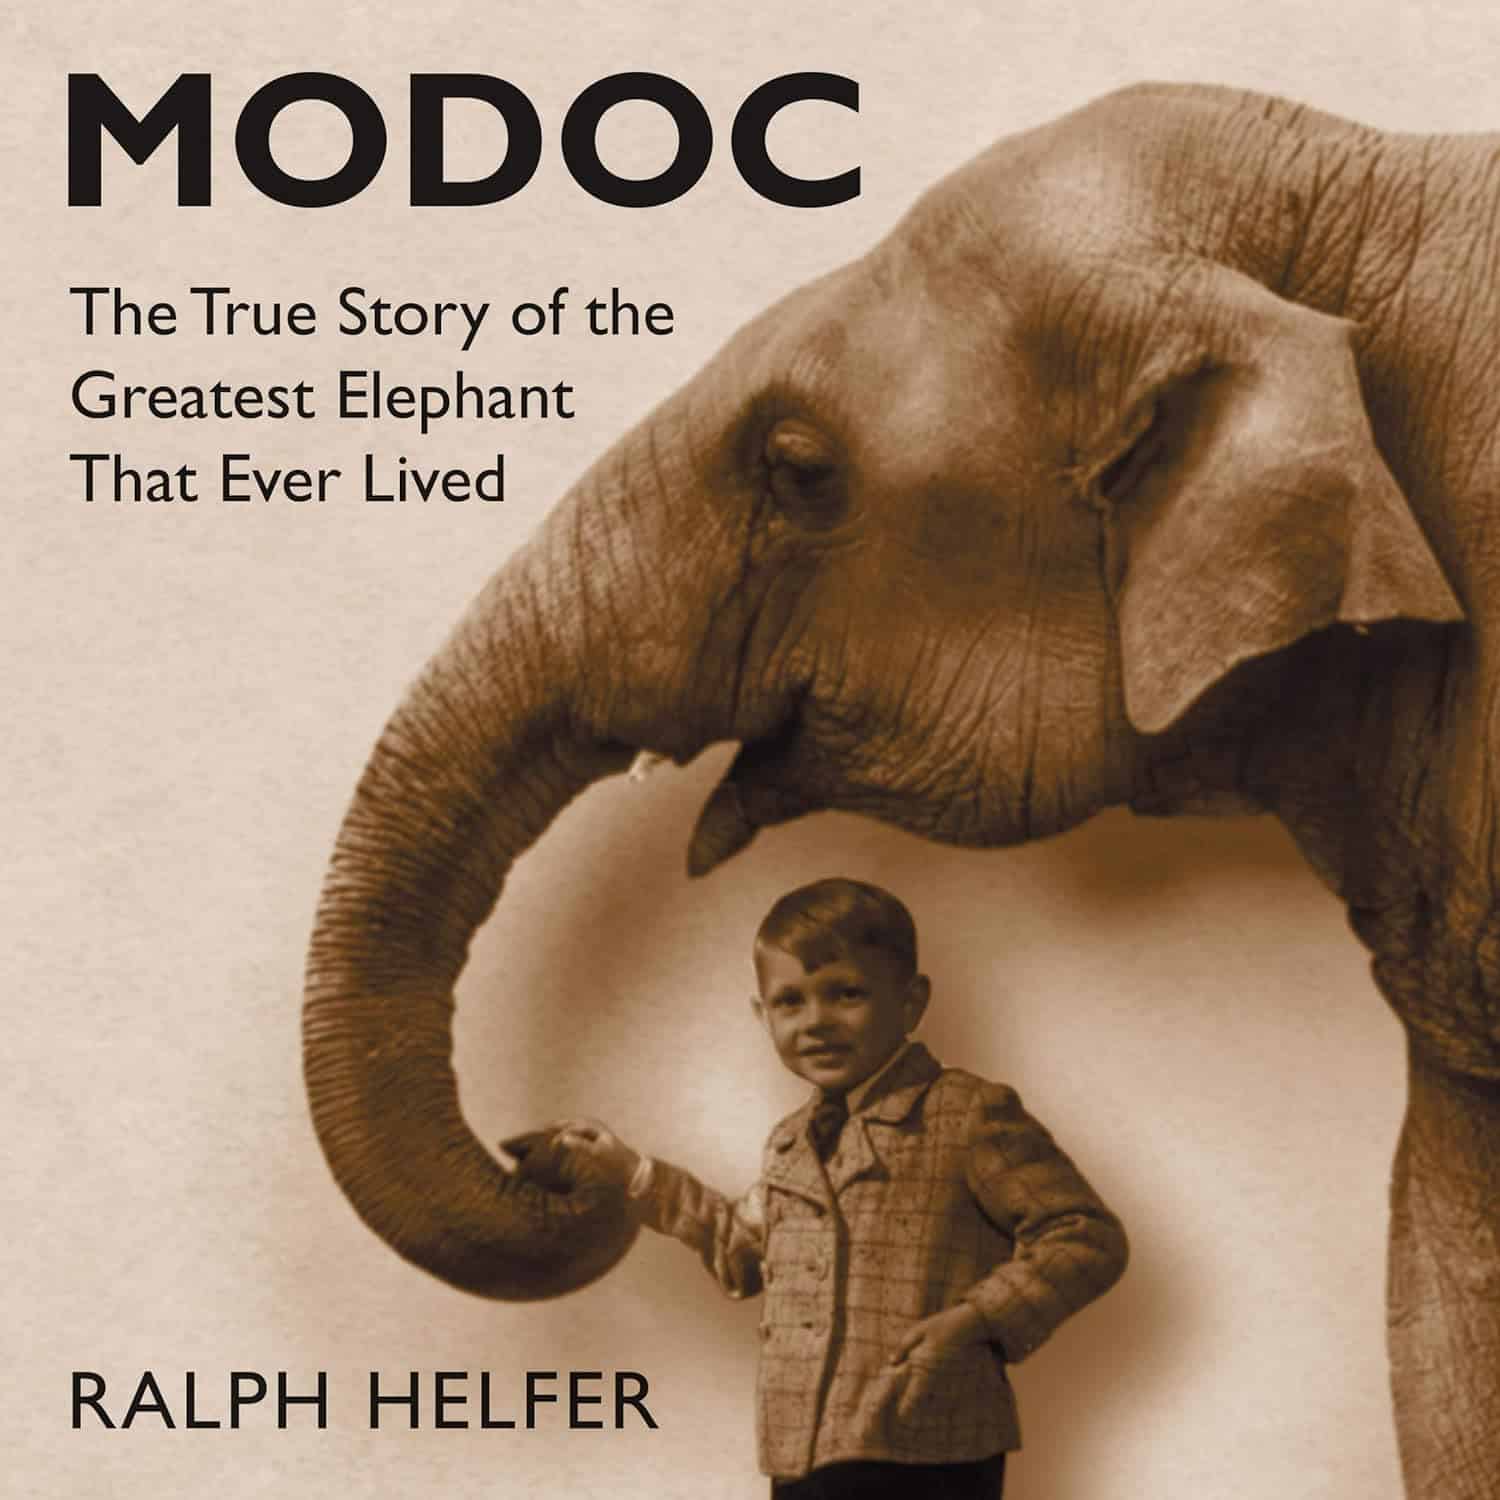 Modoc: A Captivating True Story of Friendship and Adventure